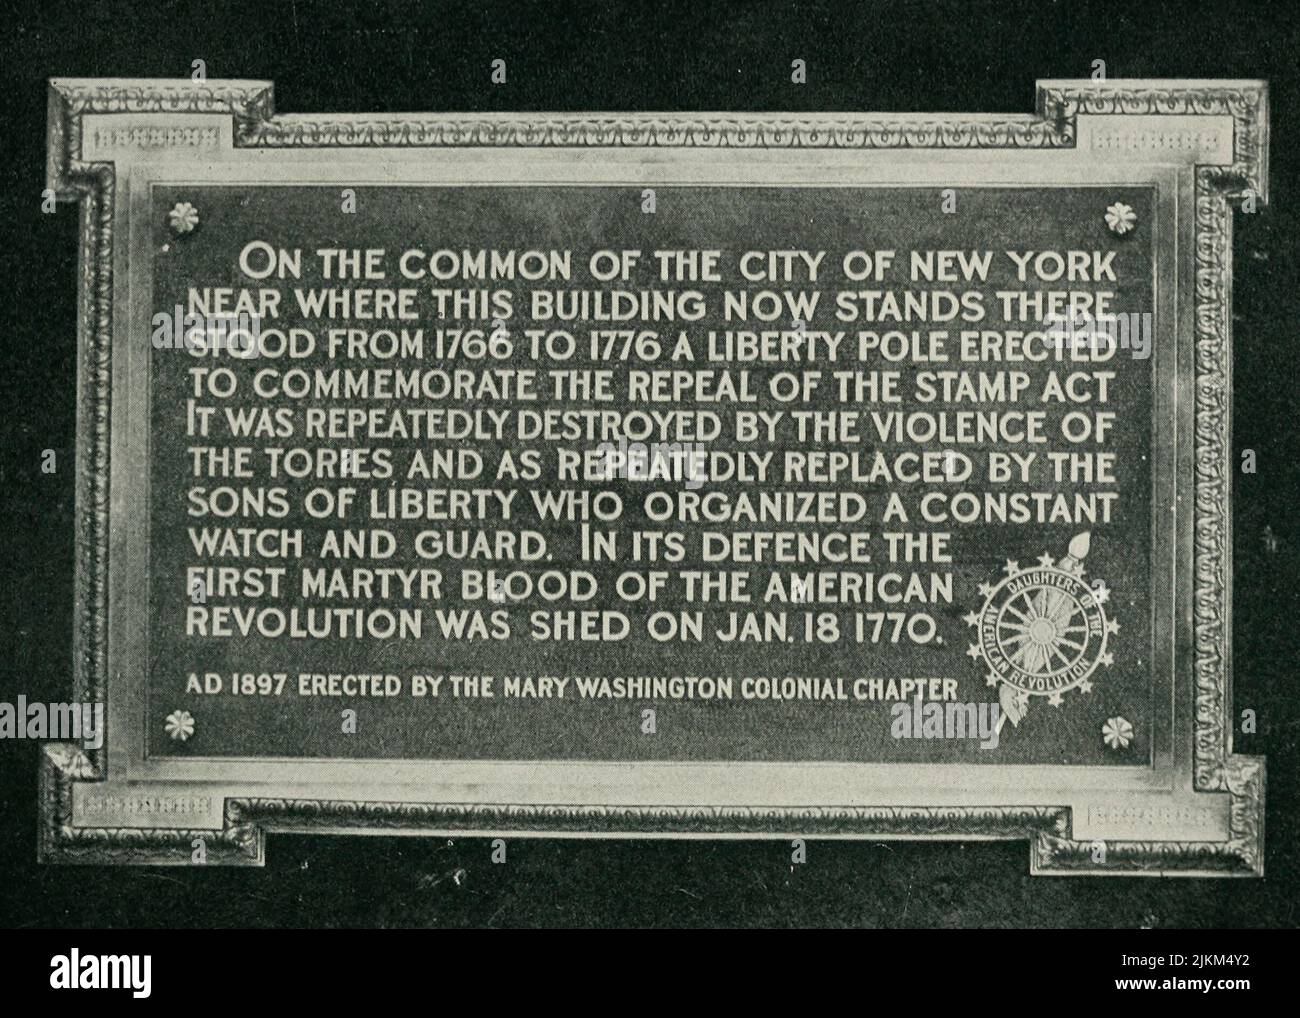 The Liberty Pole 1766-1776 - Handsome bronze tablet erected in the old Post Office Building in 1897, where it originally stood prior to the Declaration of Independence. Stock Photo